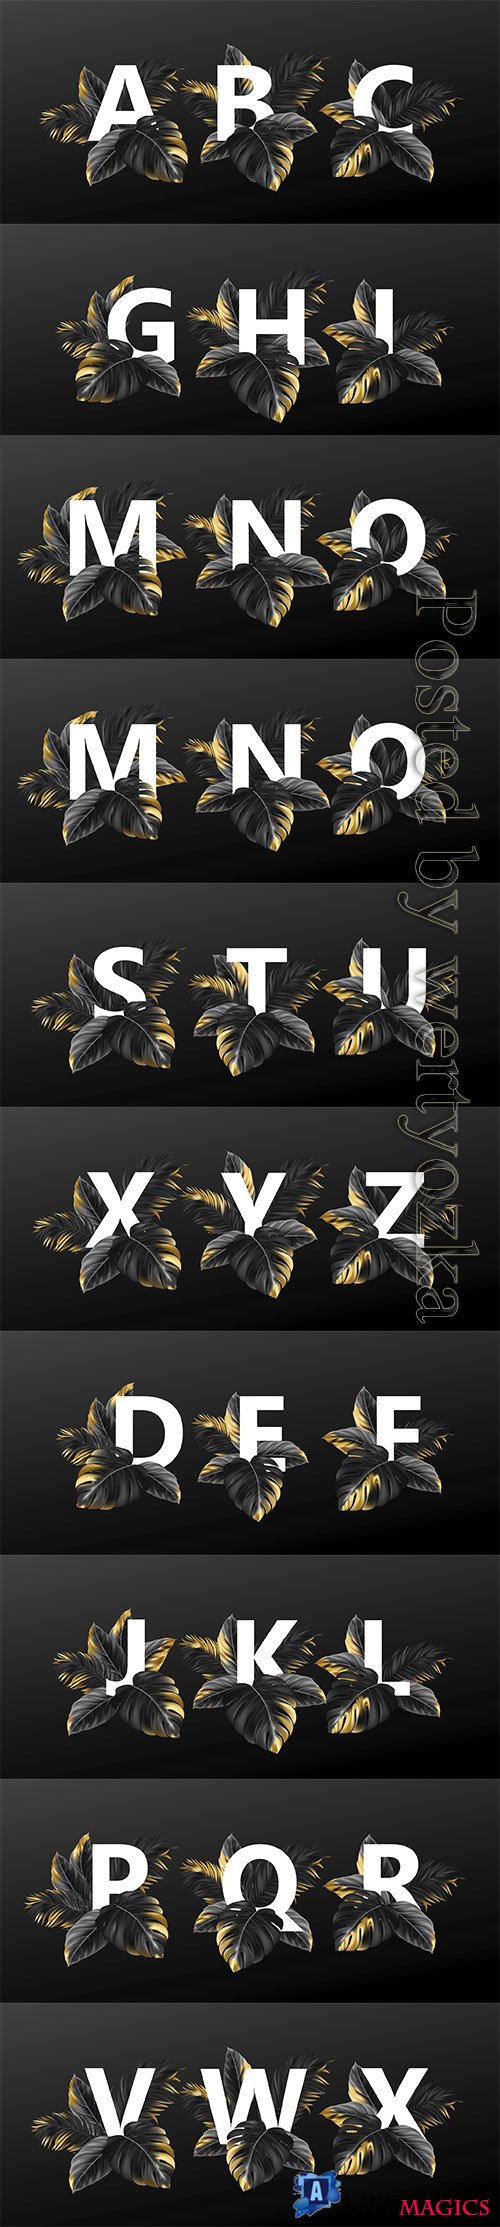 Alphabet letters in black with golden exotic tropical leaves of plants